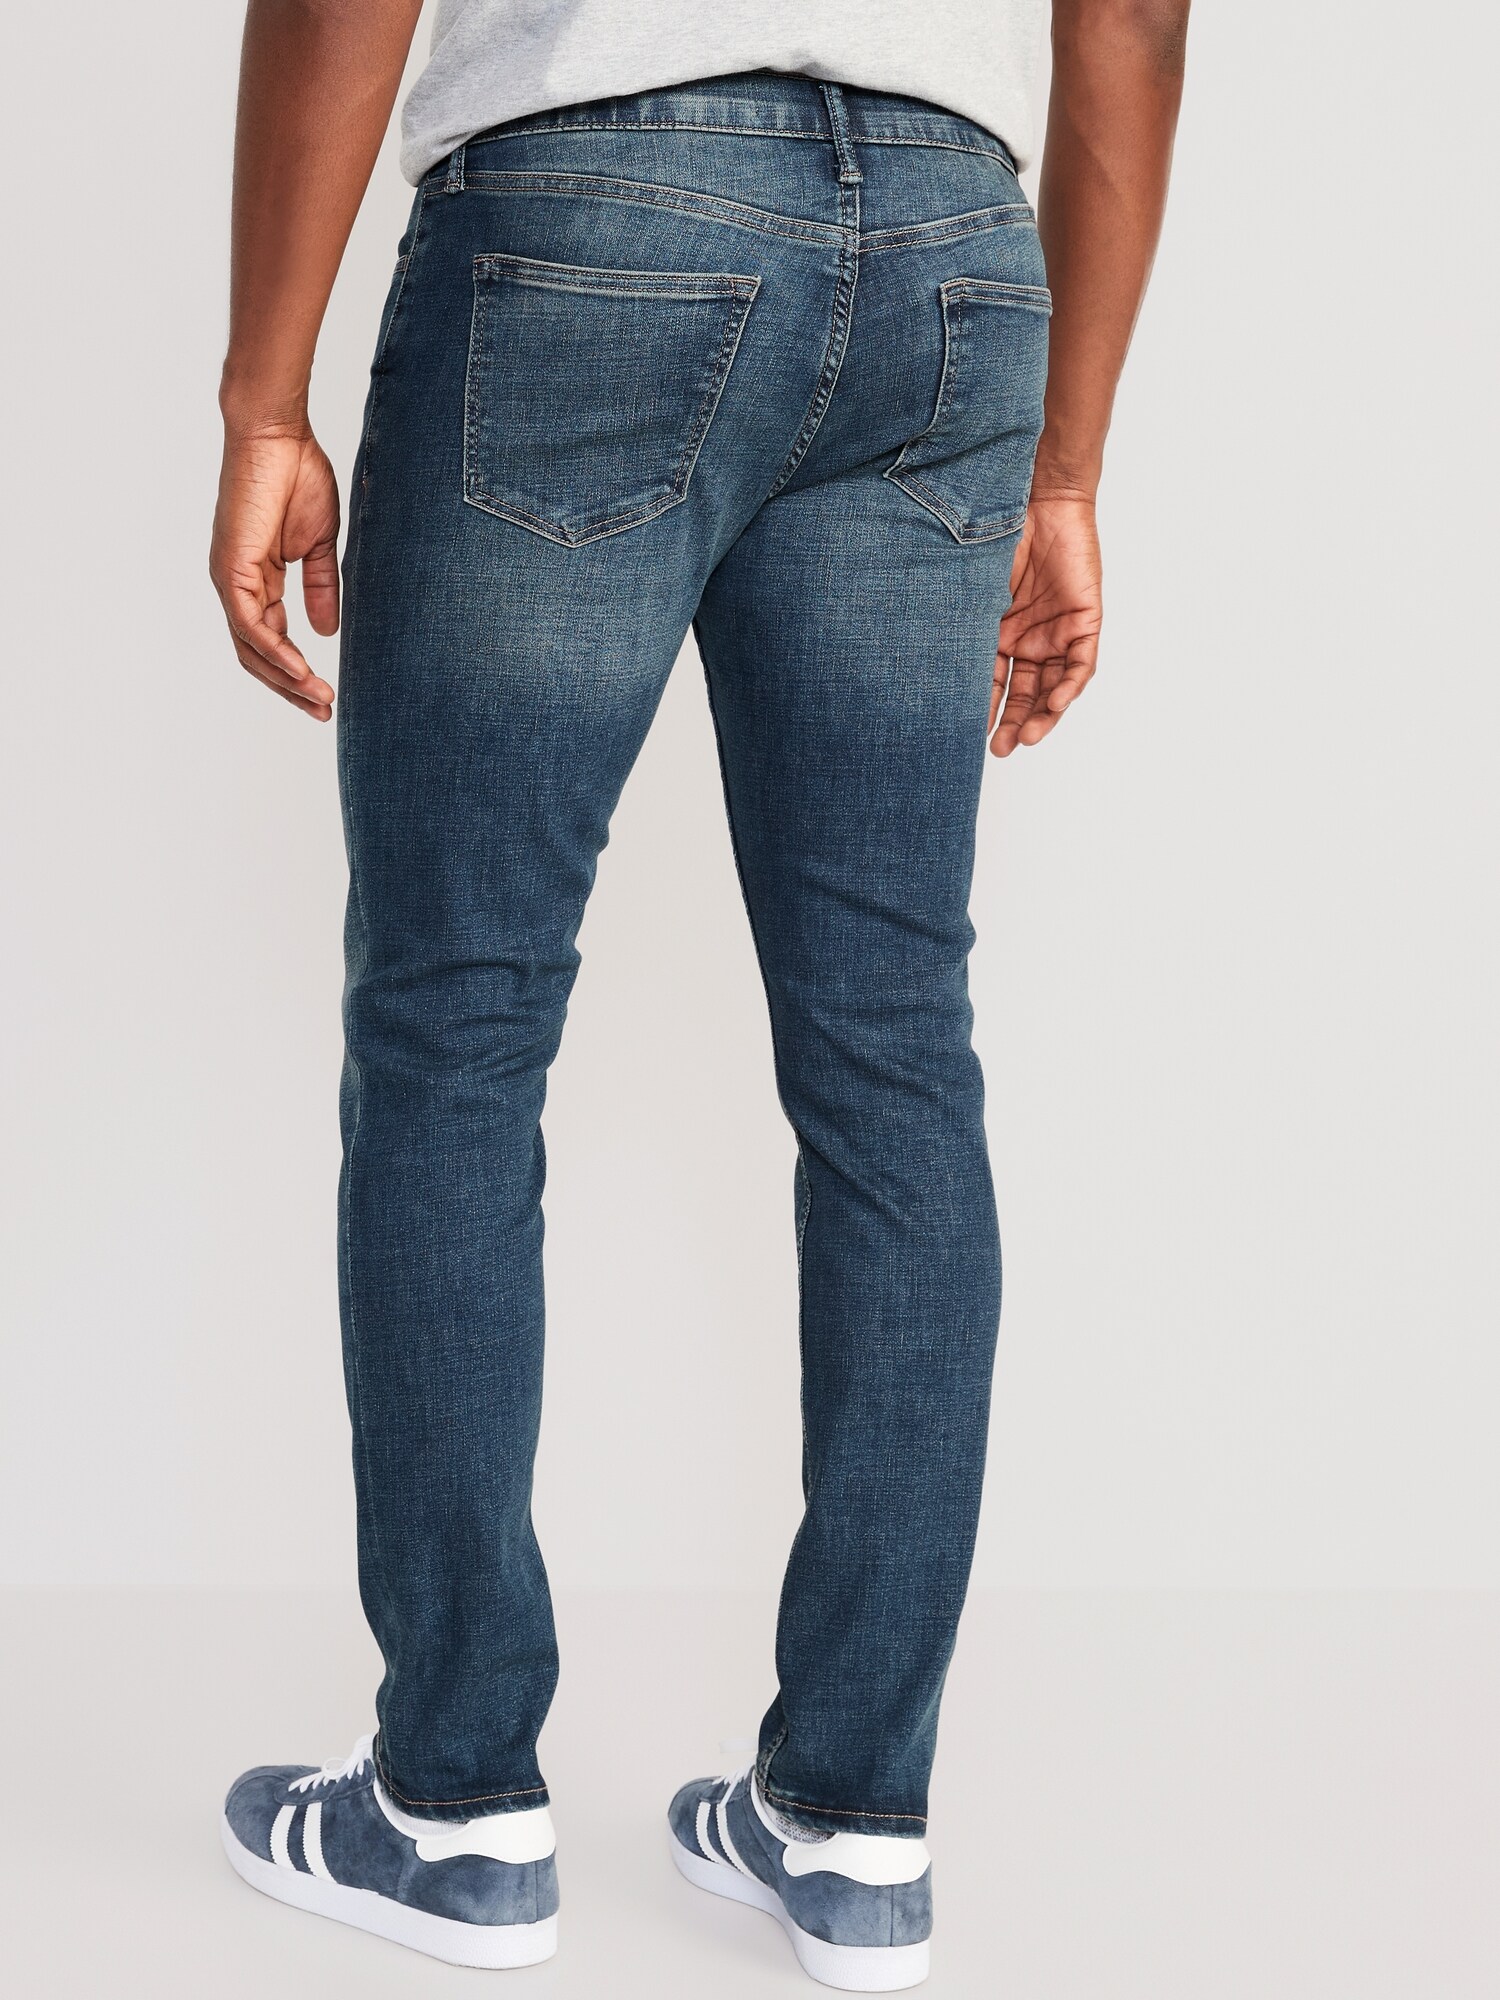 Skinny 360° Tech Stretch Performance Jeans for Men | Old Navy